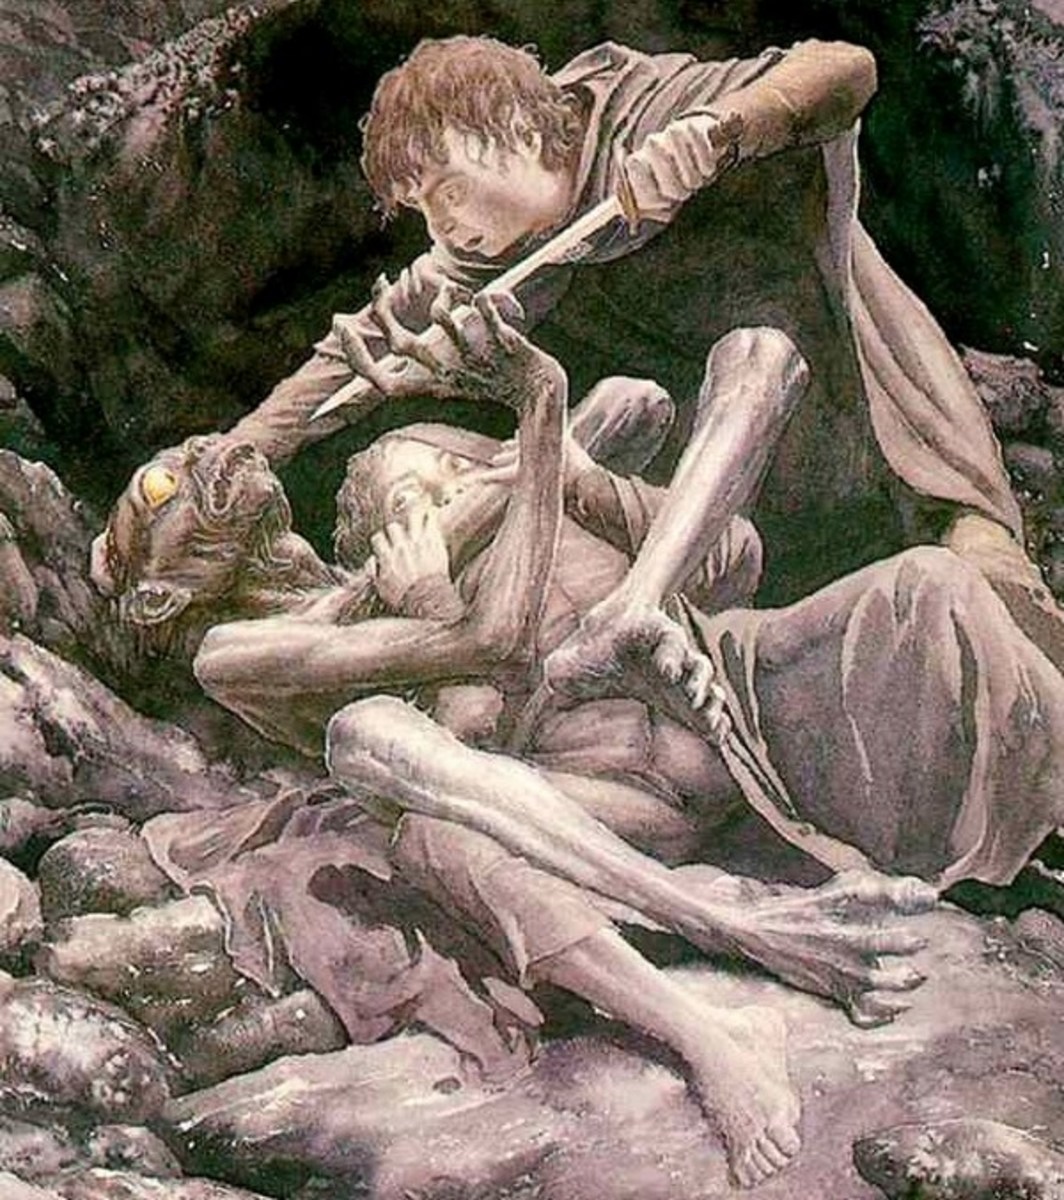 Alan Lee The Art Of Middle Earth HubPages 